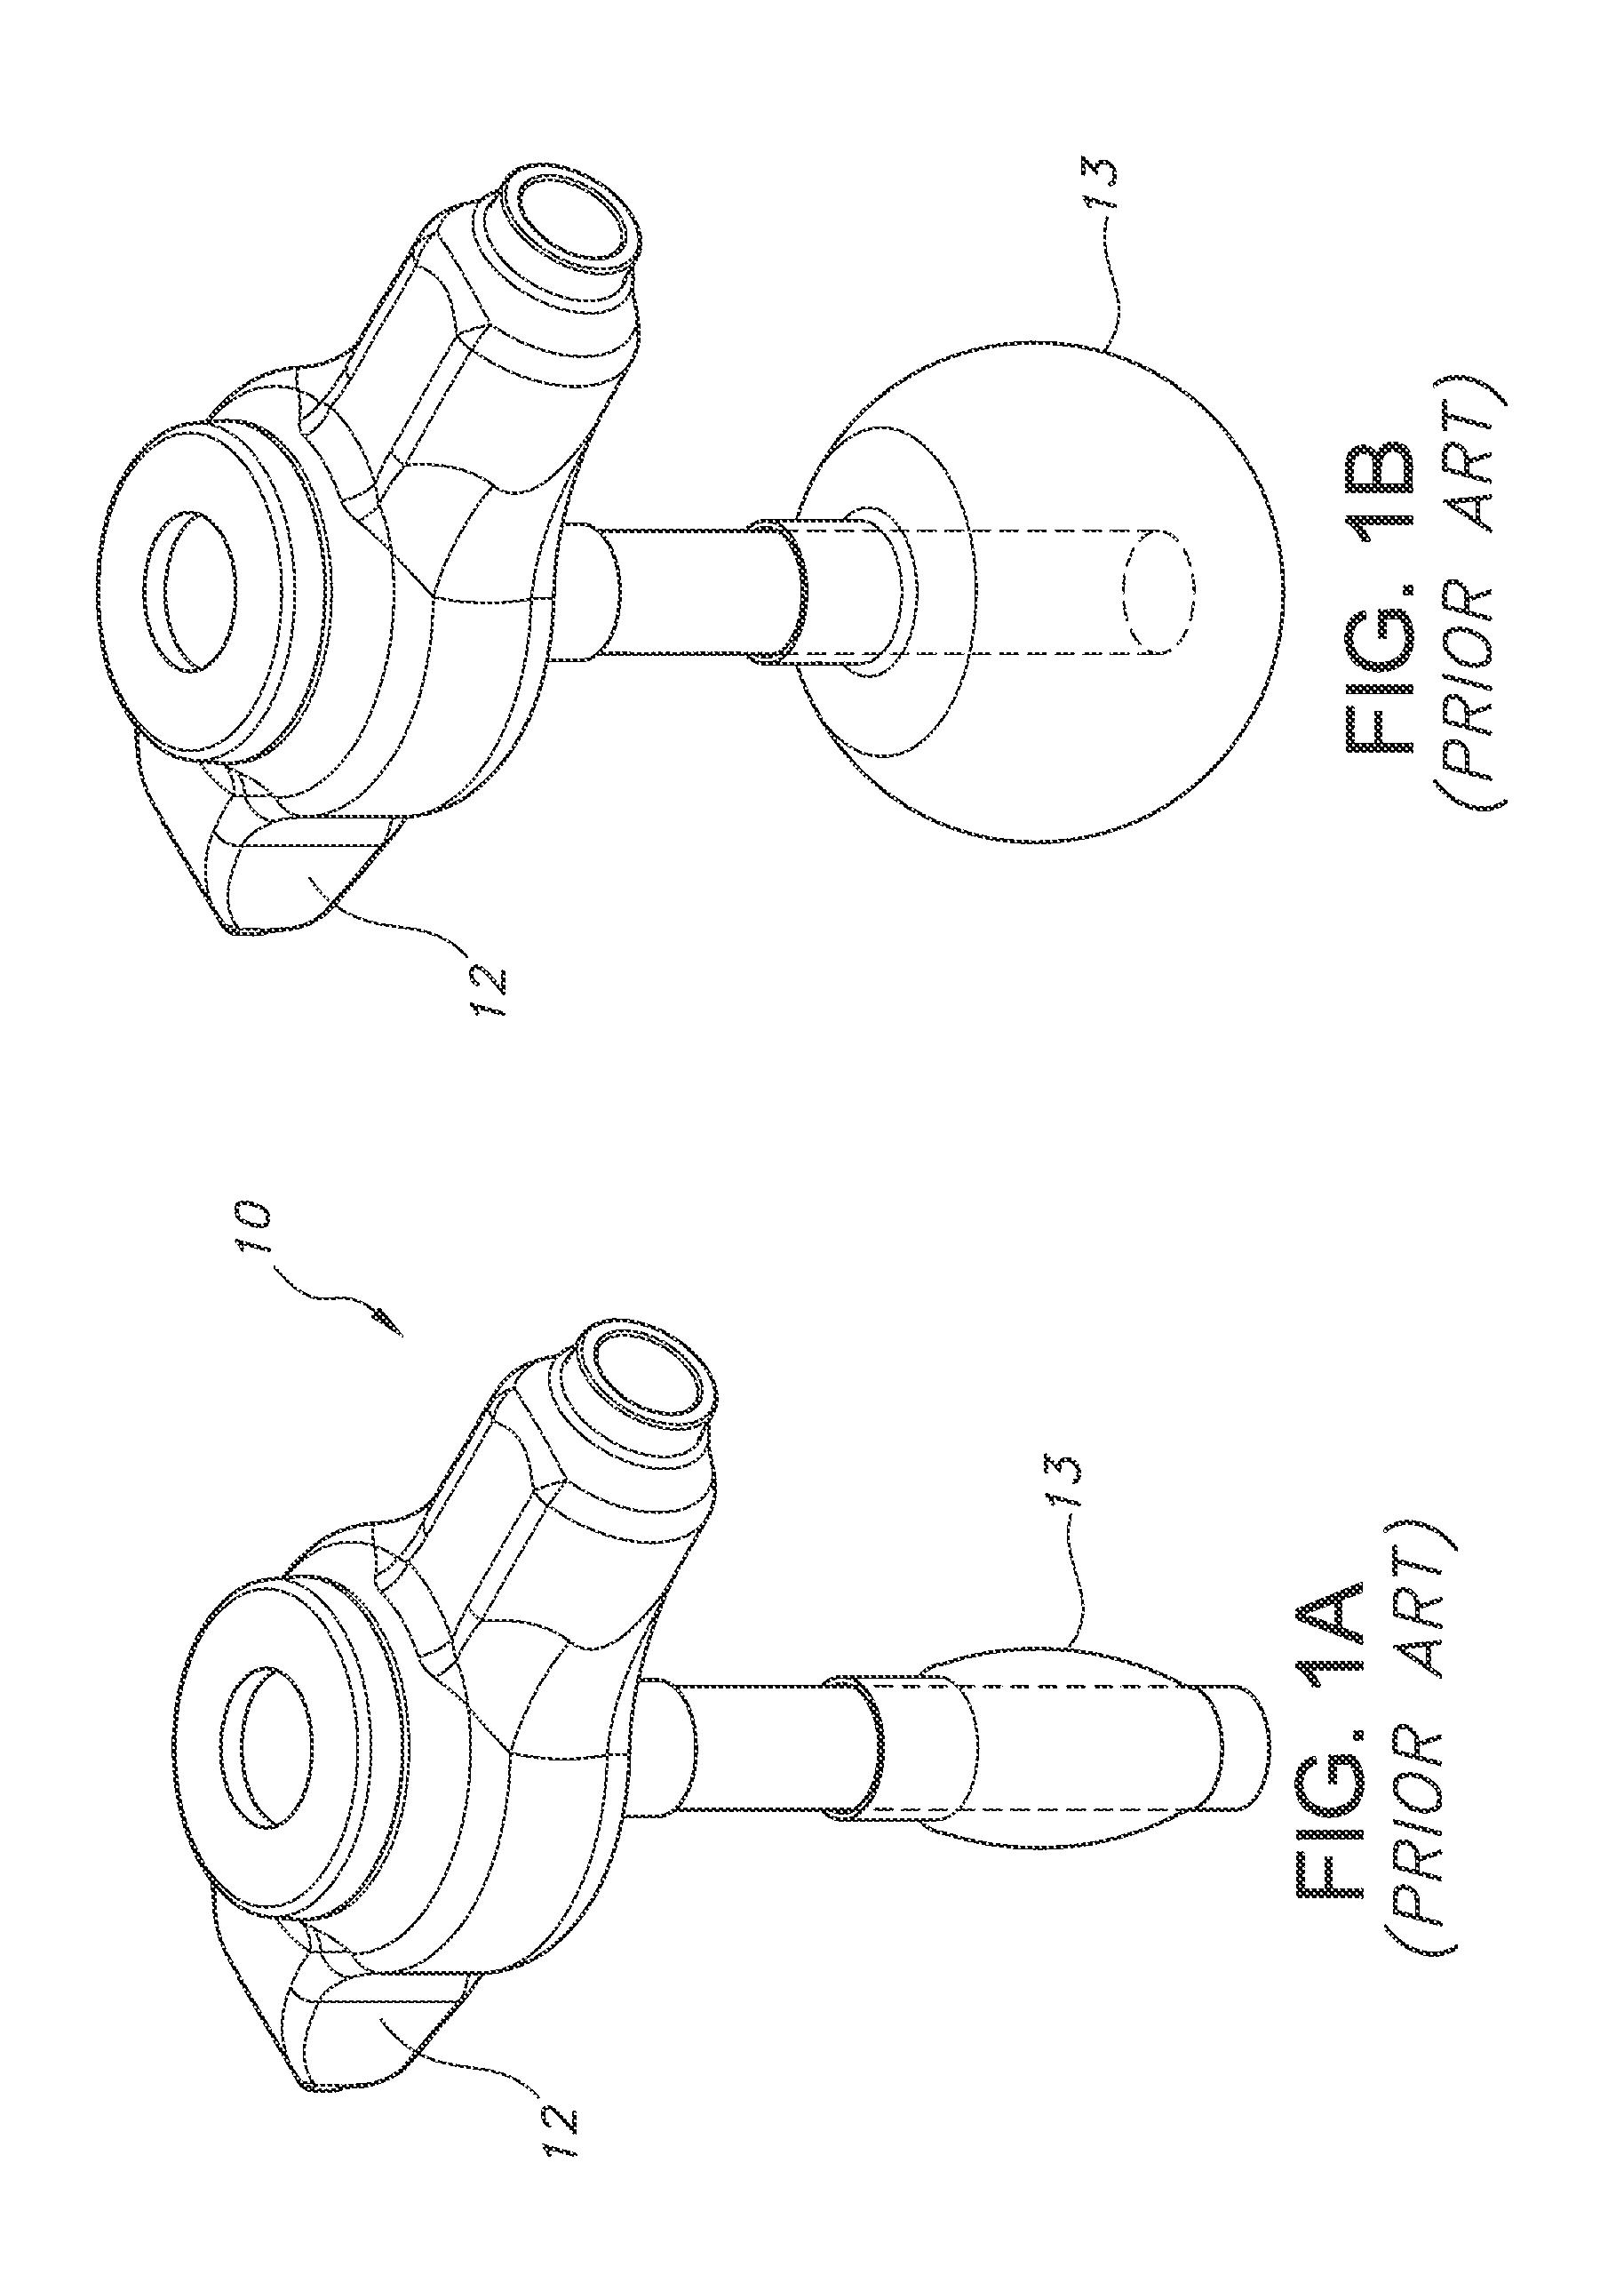 Inflatable Retention System for Enteral Feeding Device